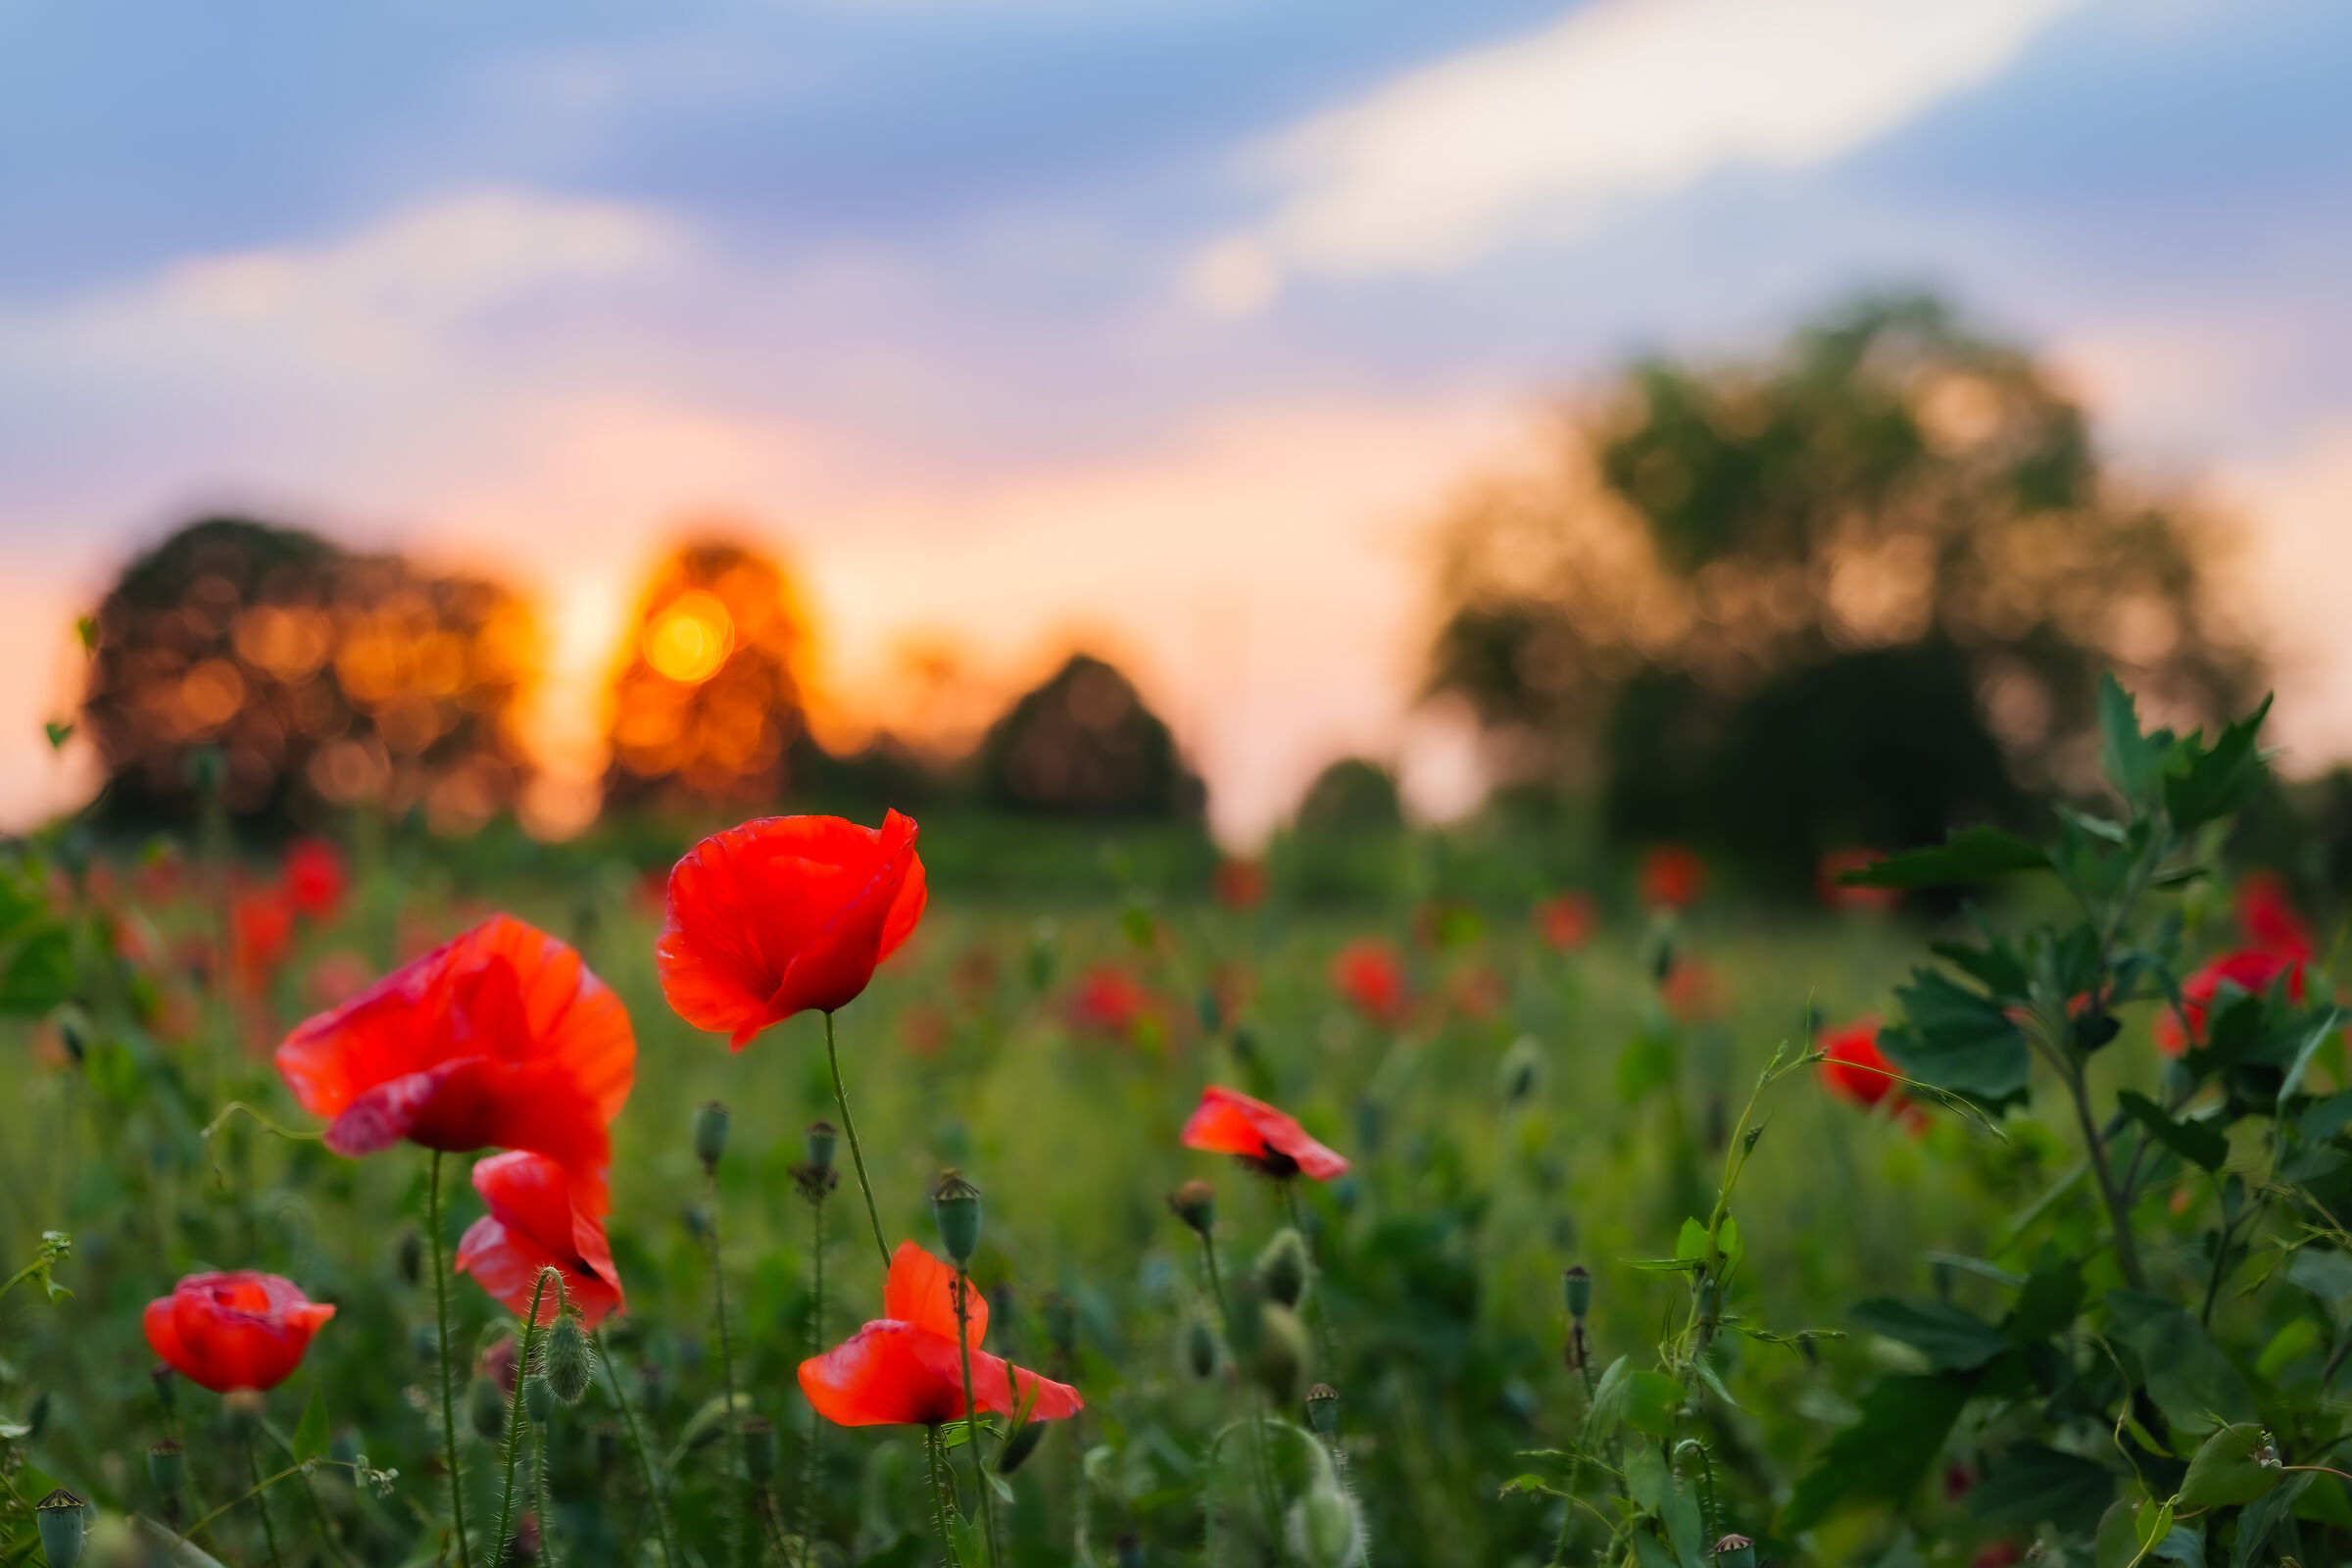 Poppies at sunset...